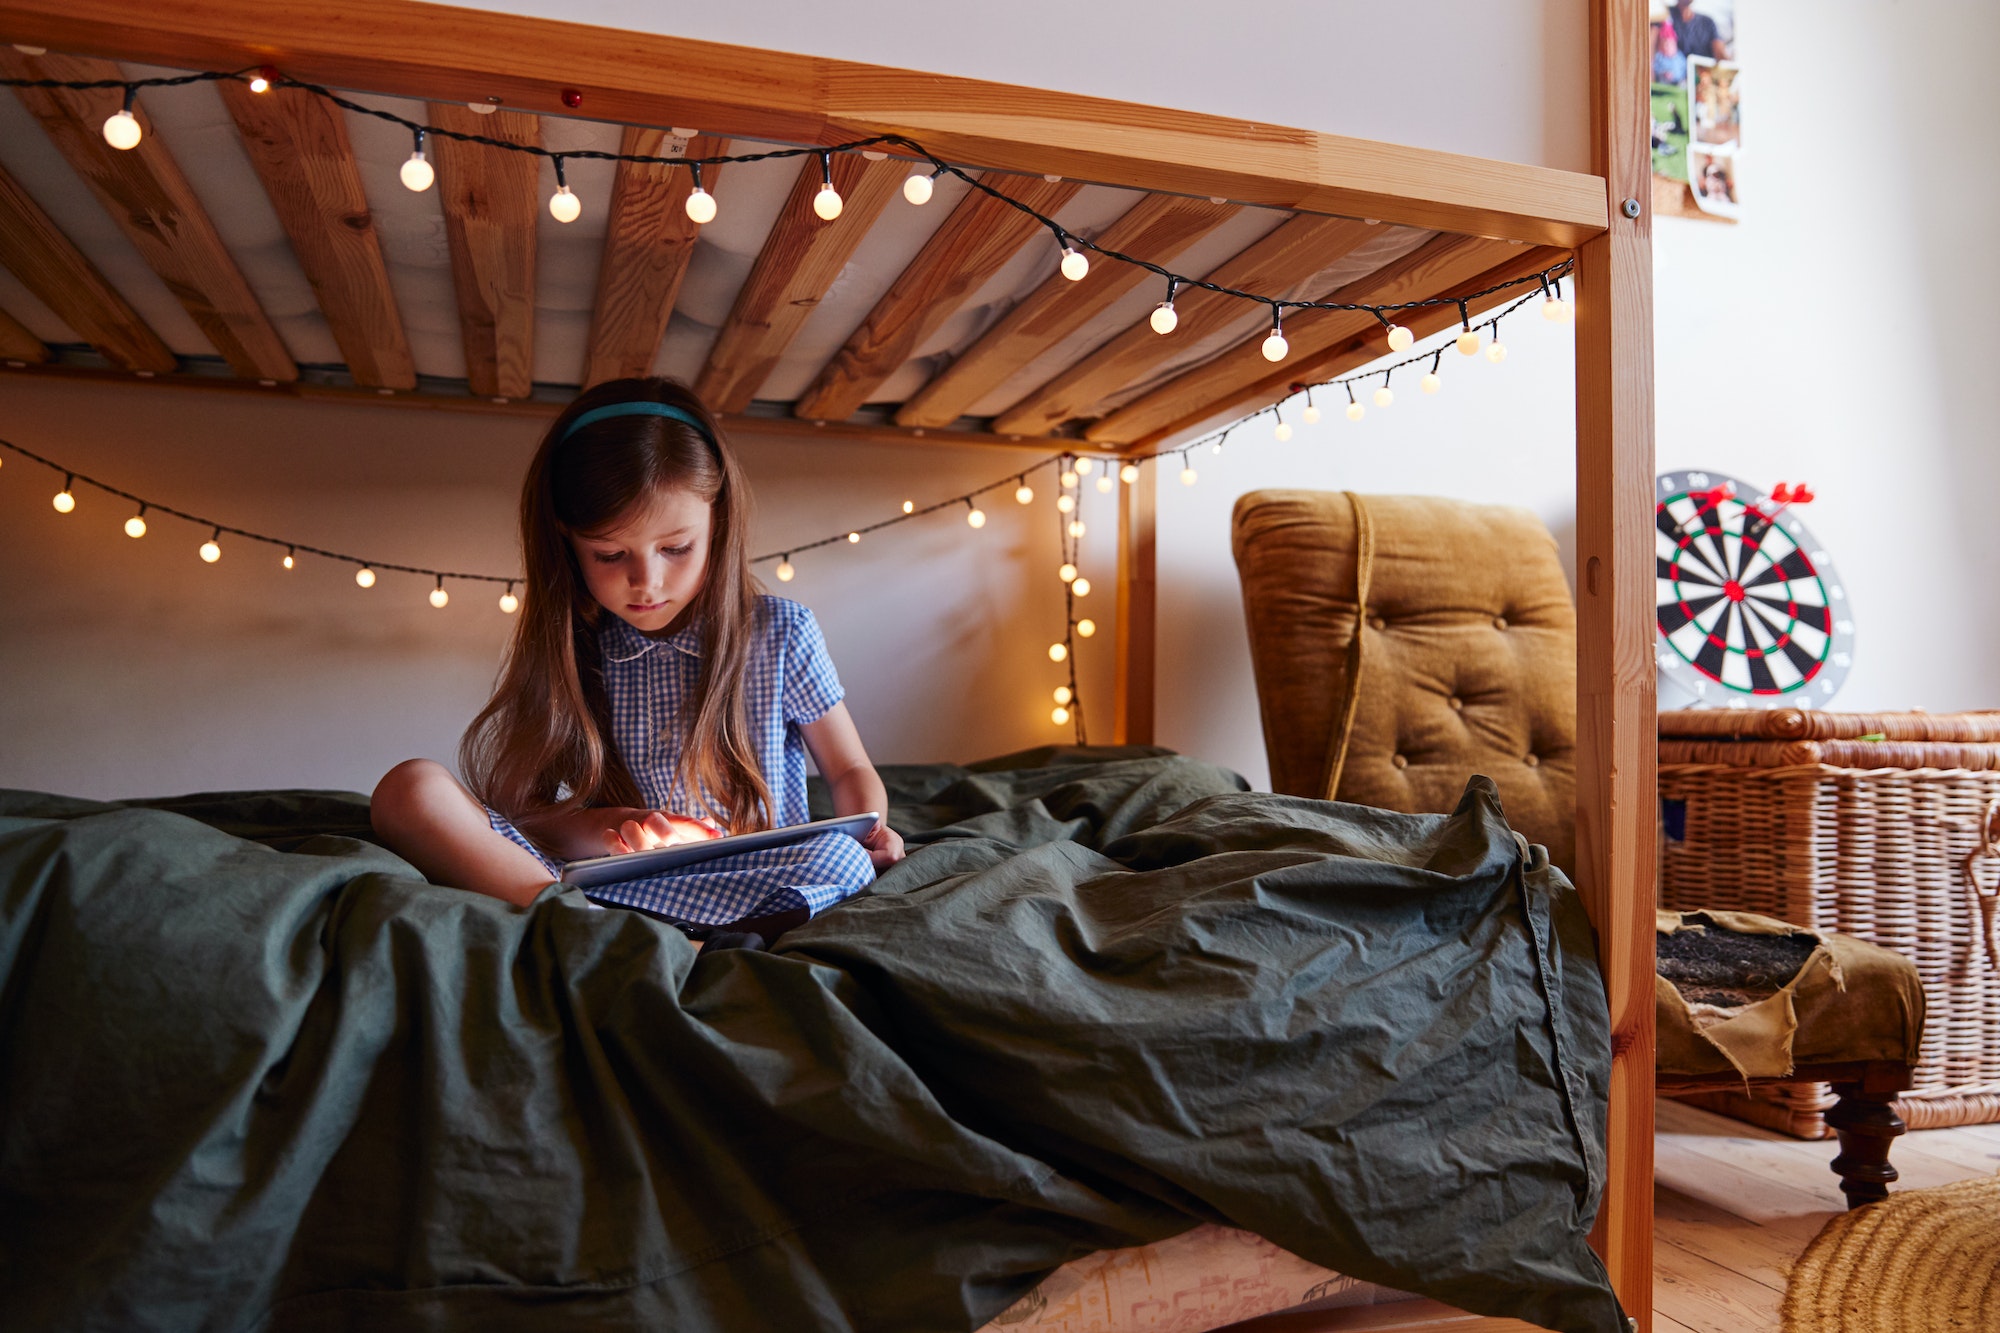 Young Girl Sitting On Bed At Home Decorated With Fairy Lights Using Digital Tablet